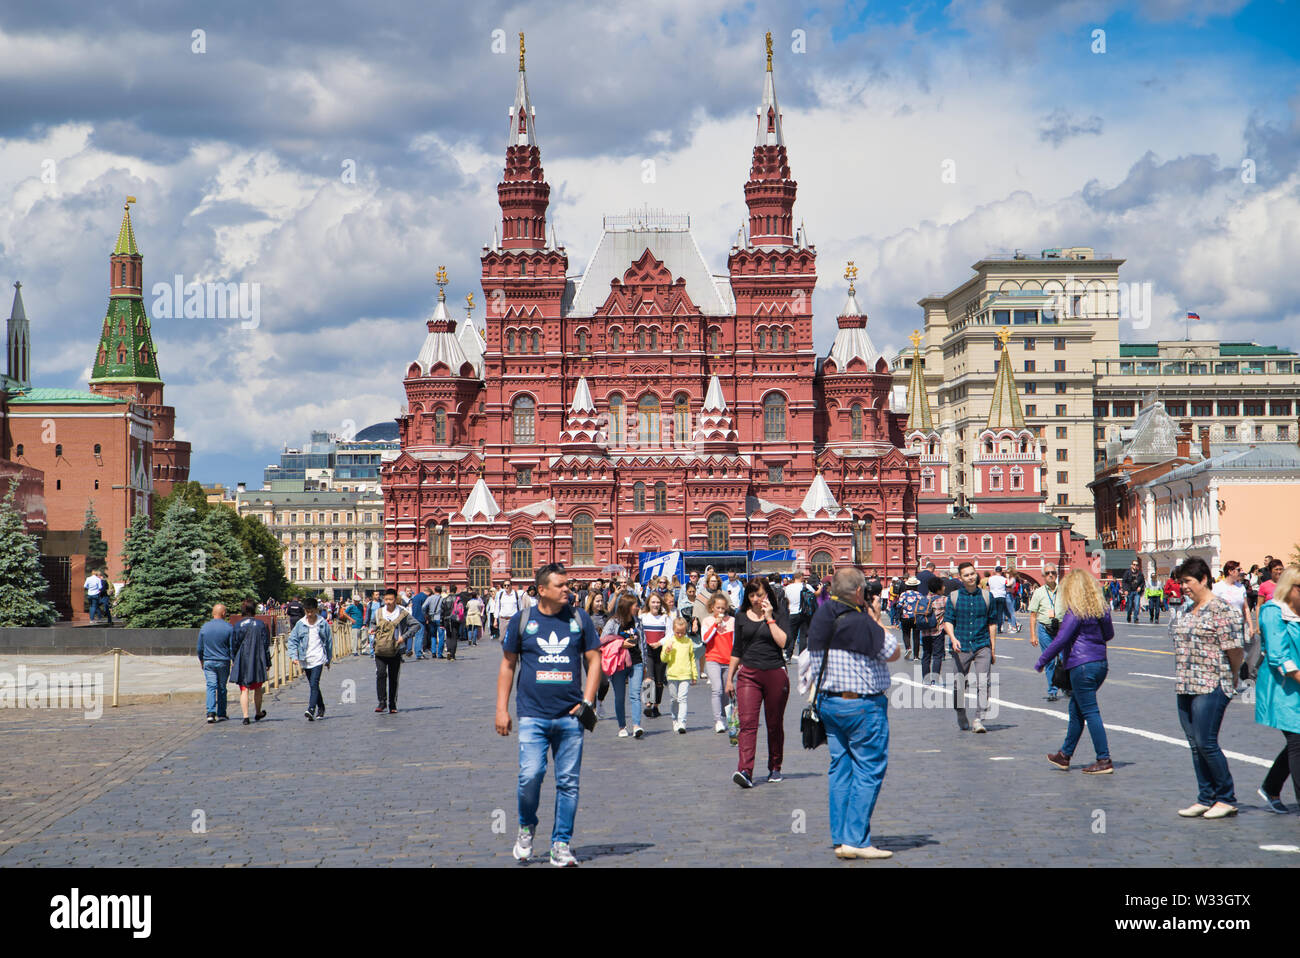 Moscow, Russia - JULY 06, 2019: State Historical Museum on Red Square Stock Photo